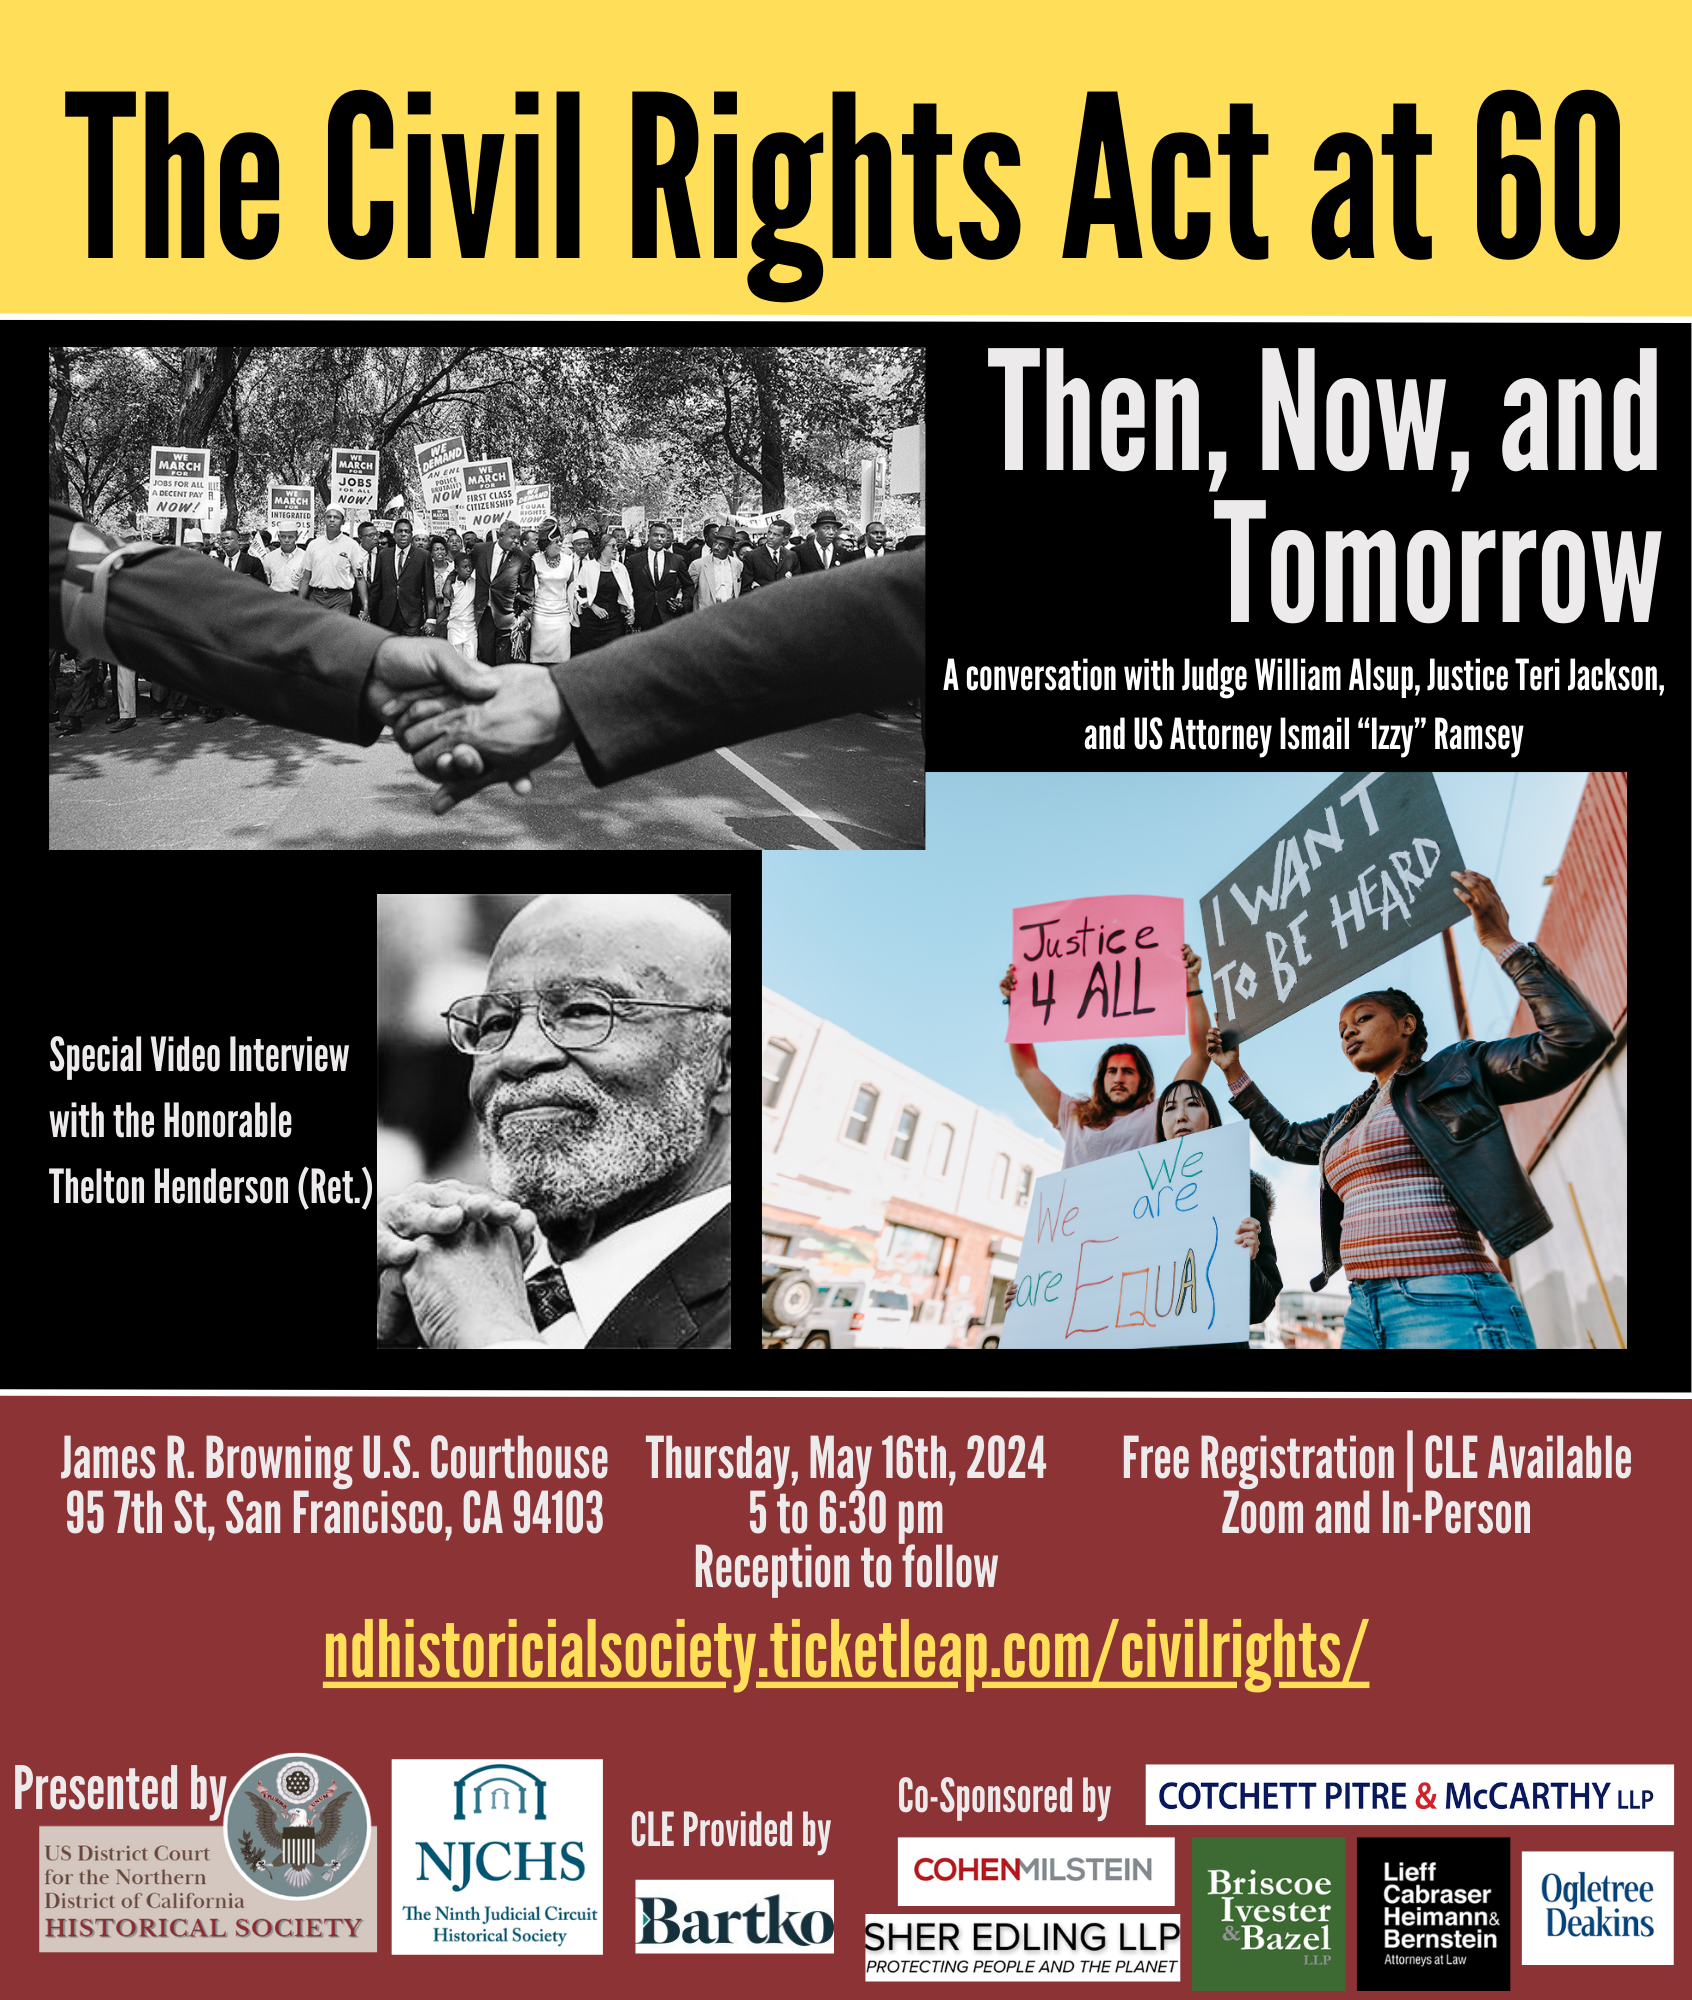 Pictured: Flyer for The Civil Rights Act at 60: Then, Now, and Tomorrow